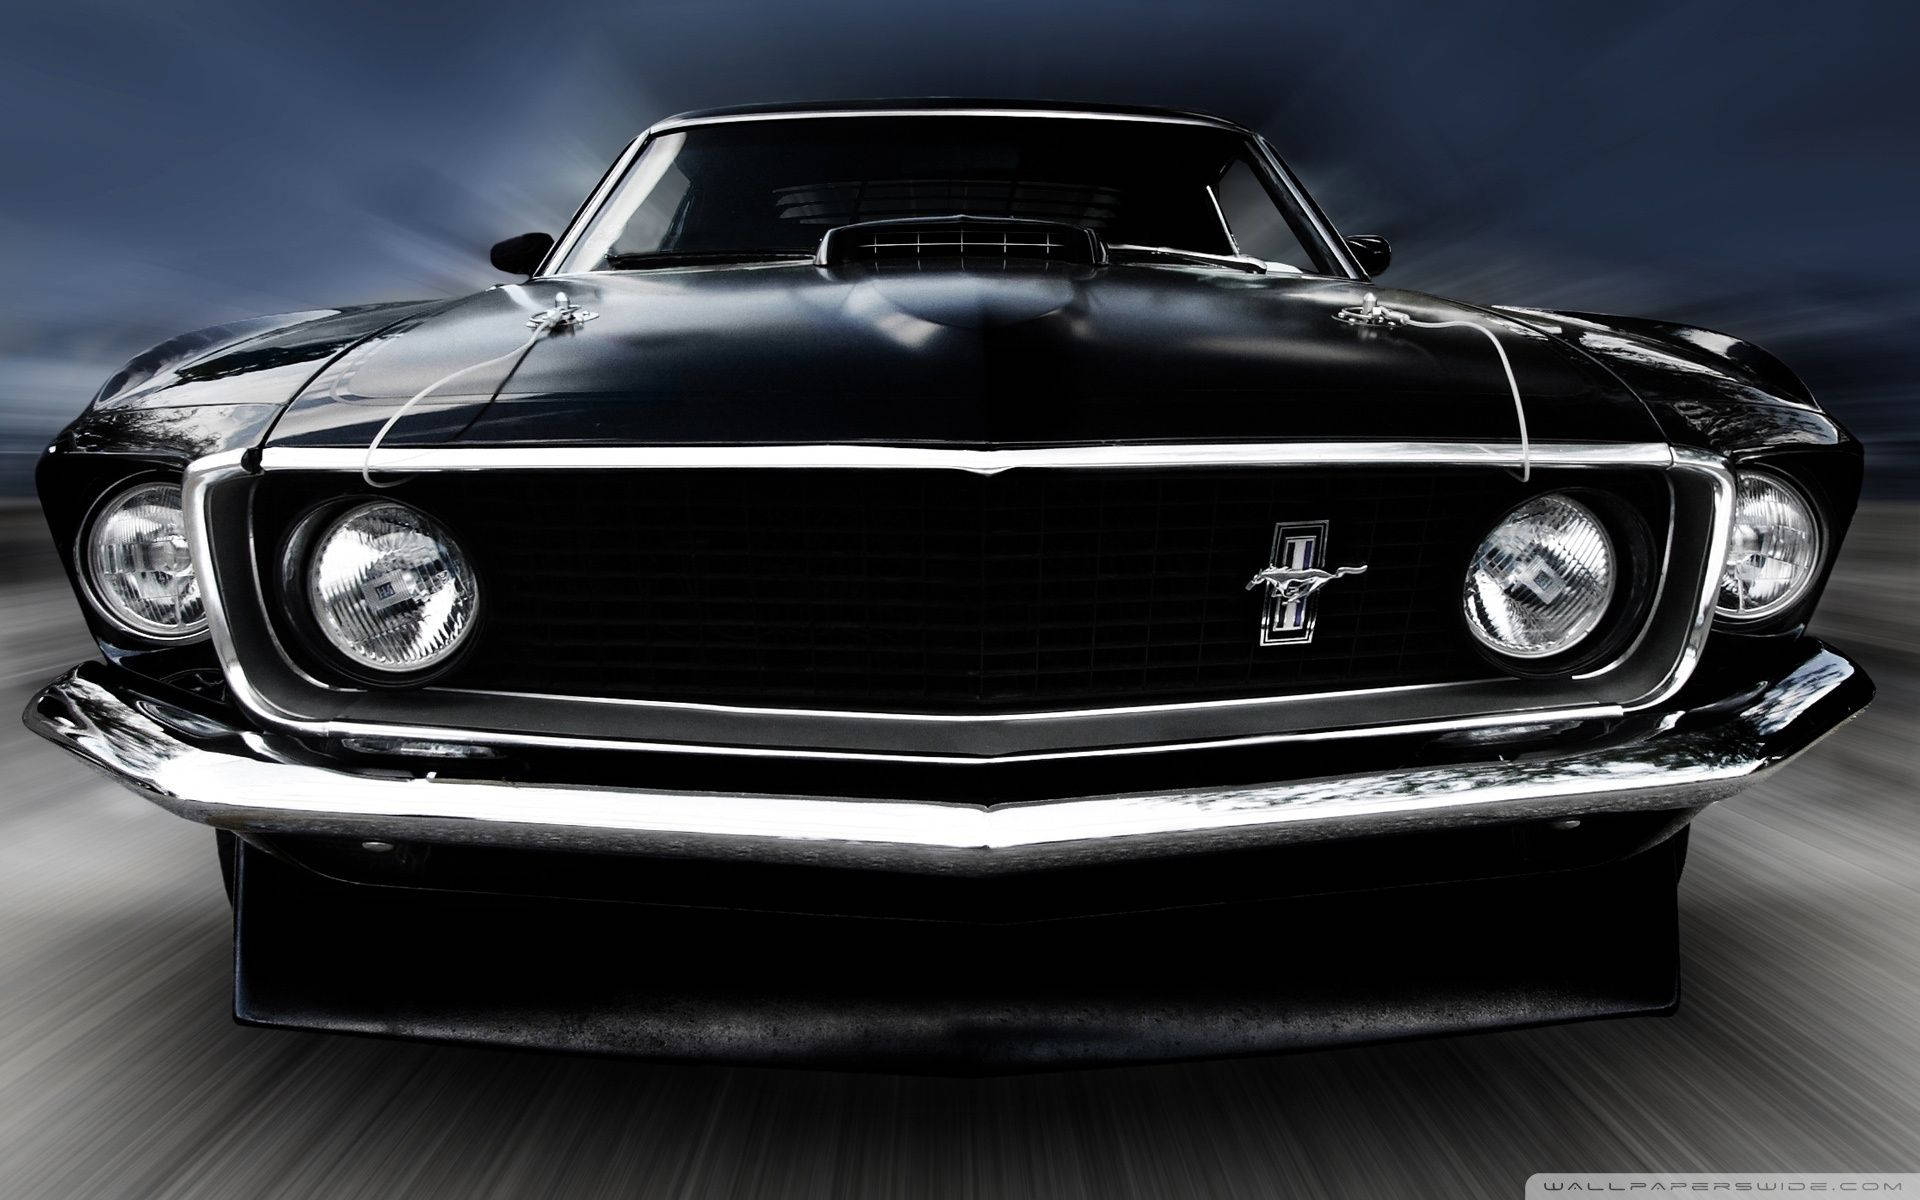 Black Ford Mustang 1969 Background